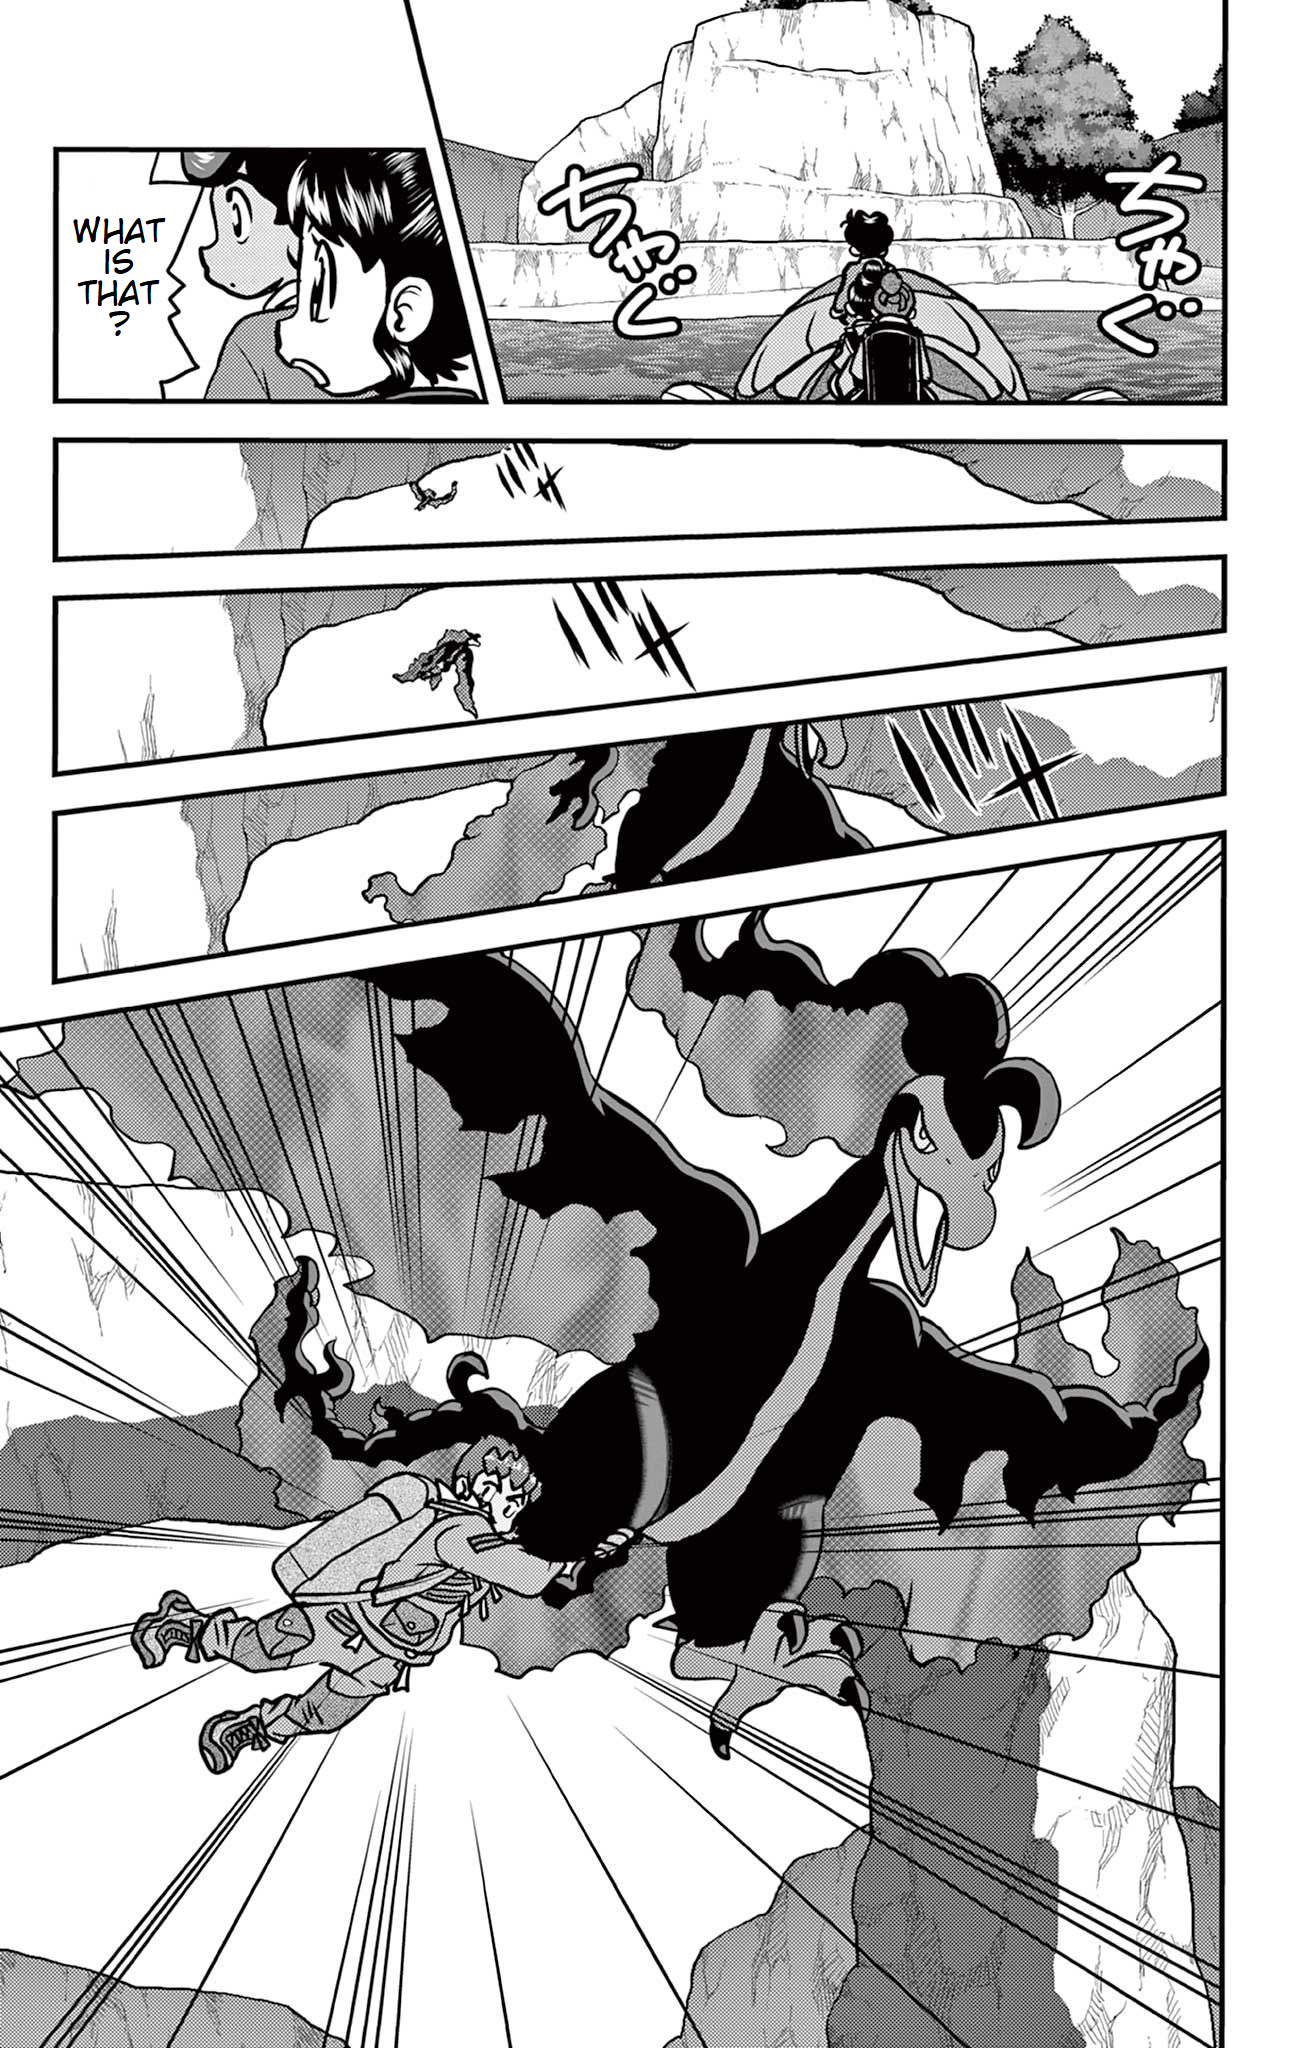 Pokémon SPECIAL Sword and Shield Vol.6 Chapter 37